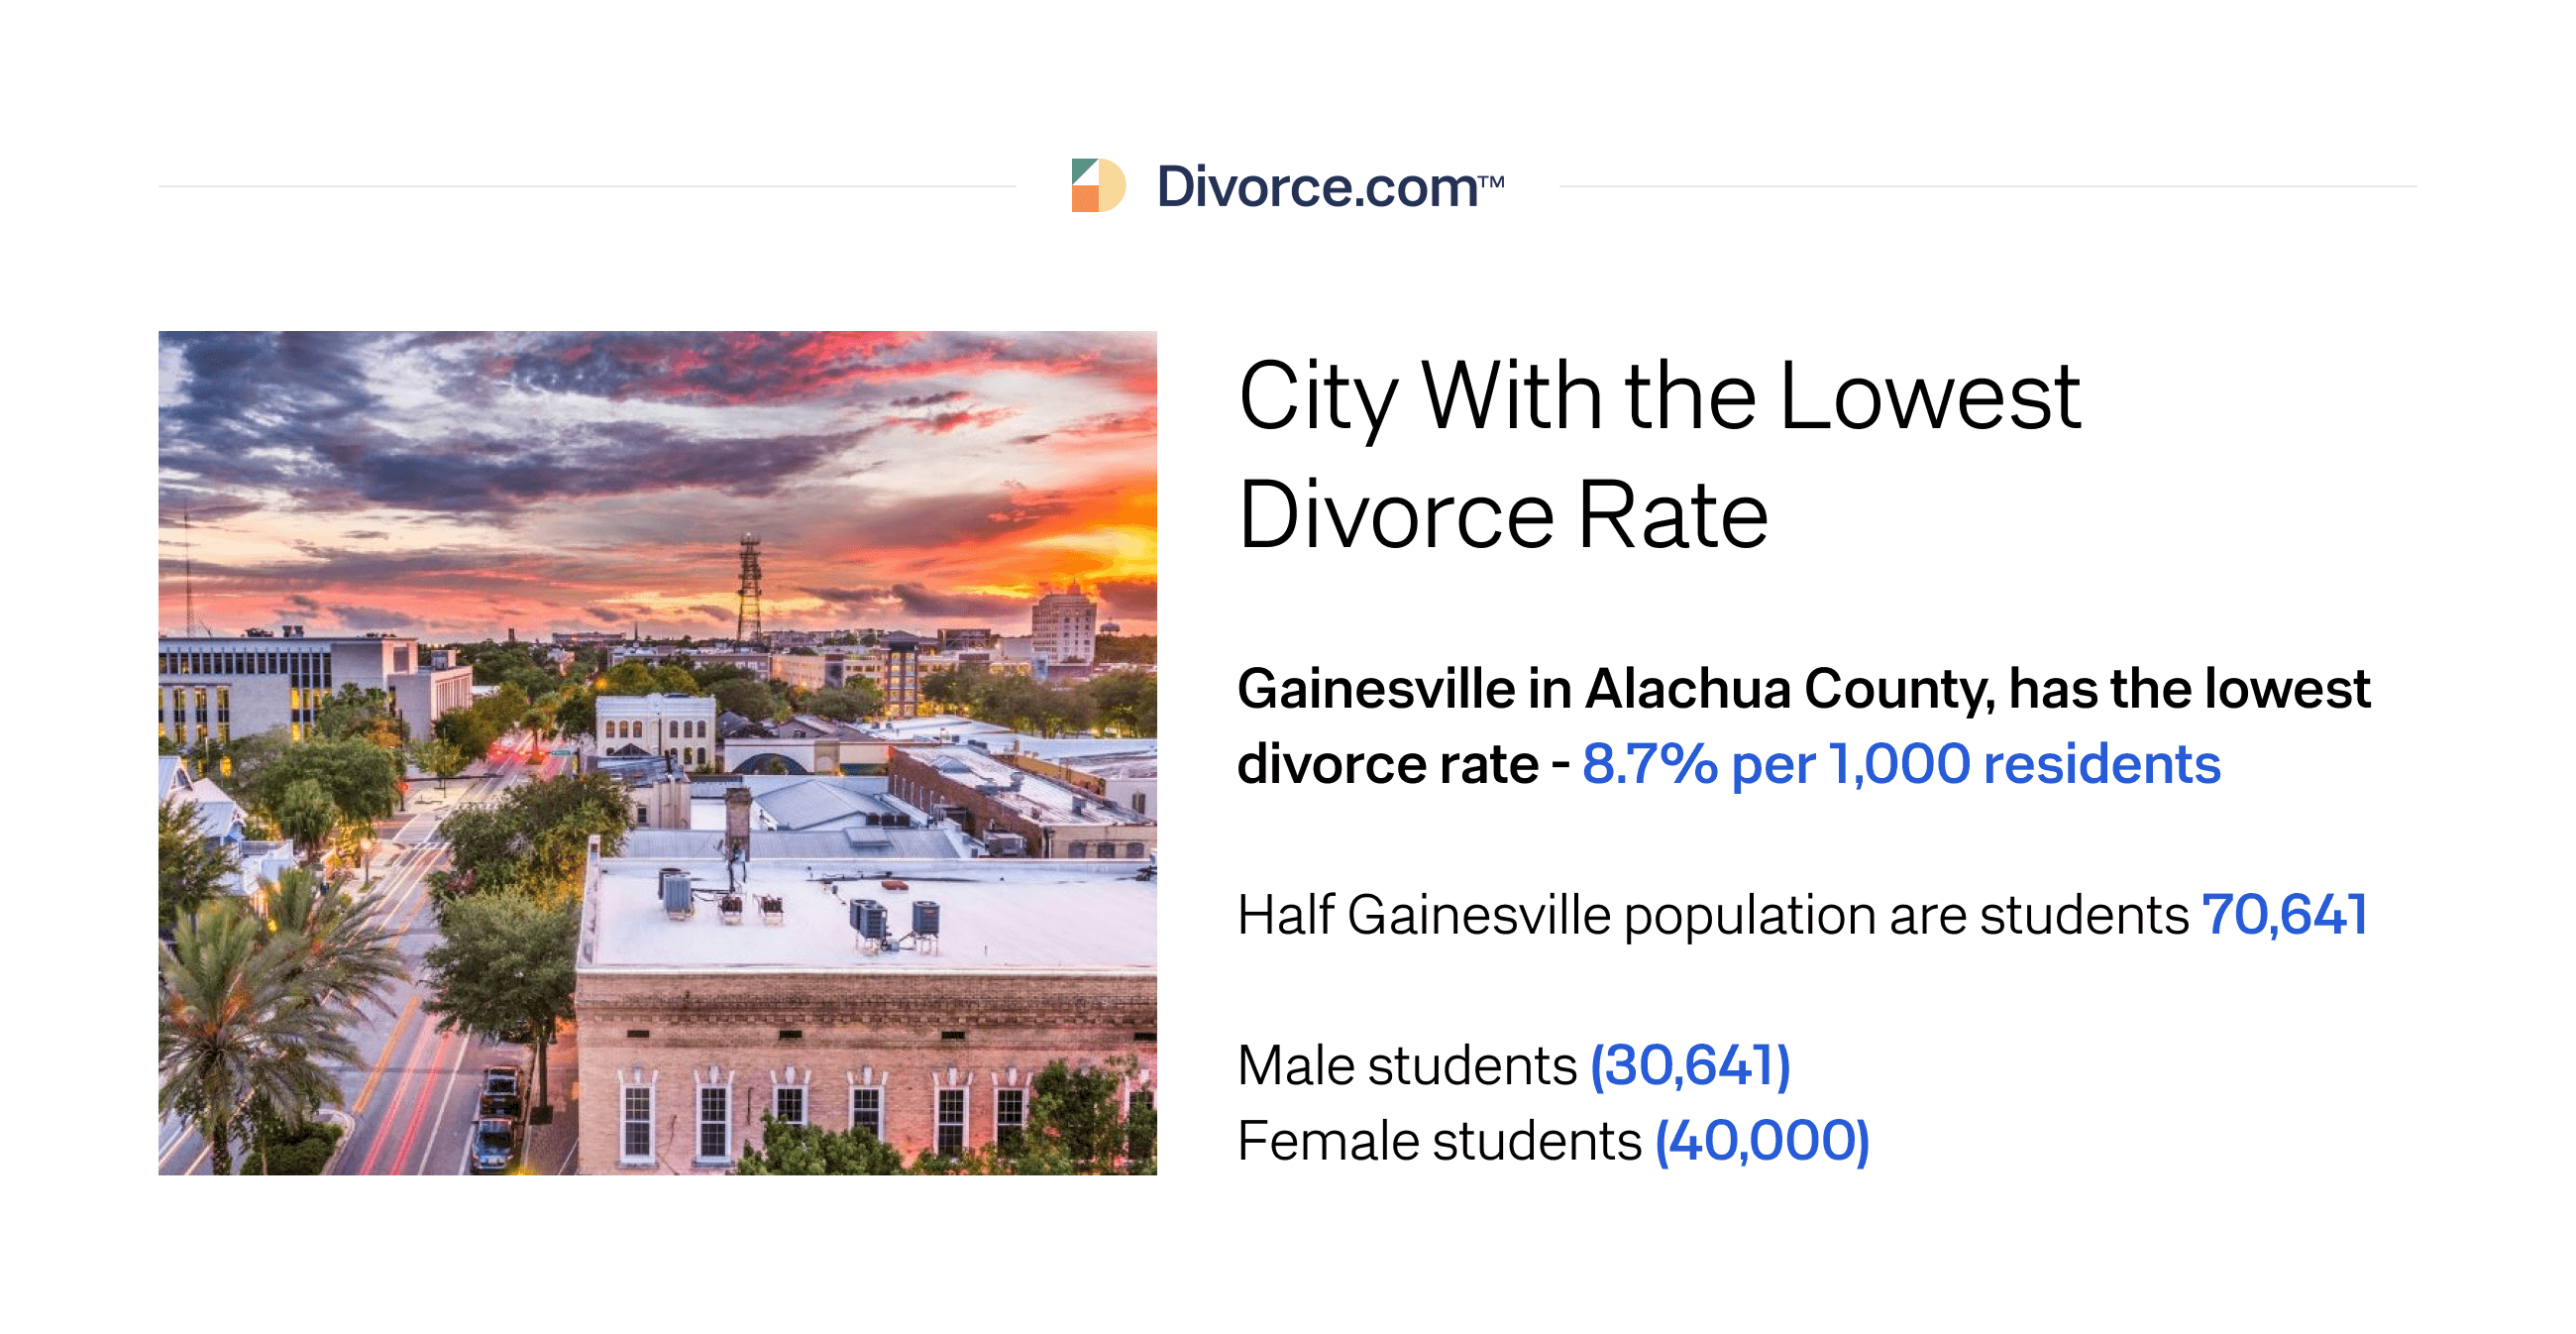 City With the Lowest Divorce Rate